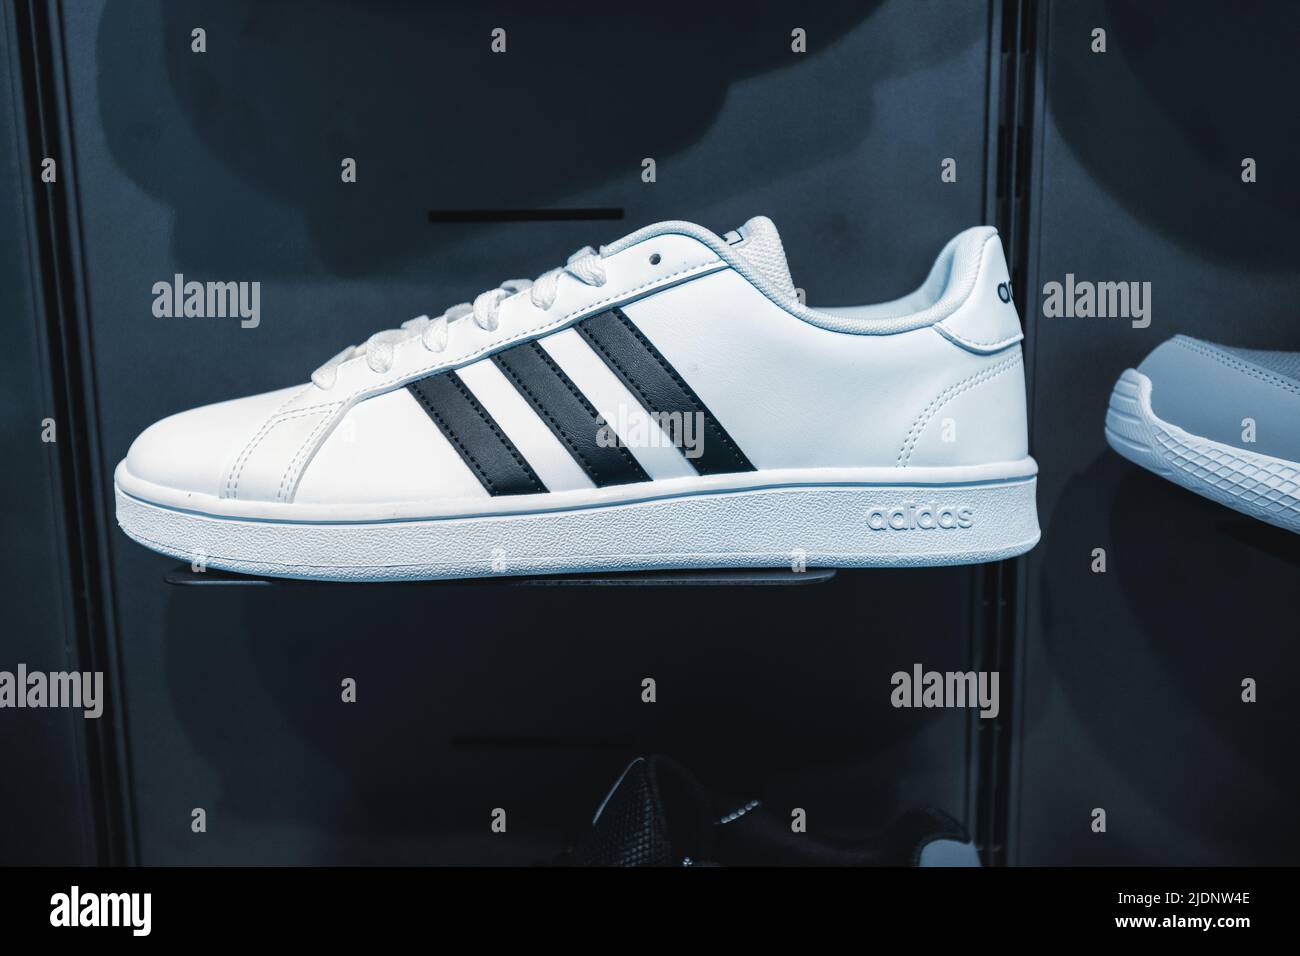 26 May 2022, Antalya, Turkey: Casual and trendy adidas shoes on a showcase  in original store Stock Photo - Alamy